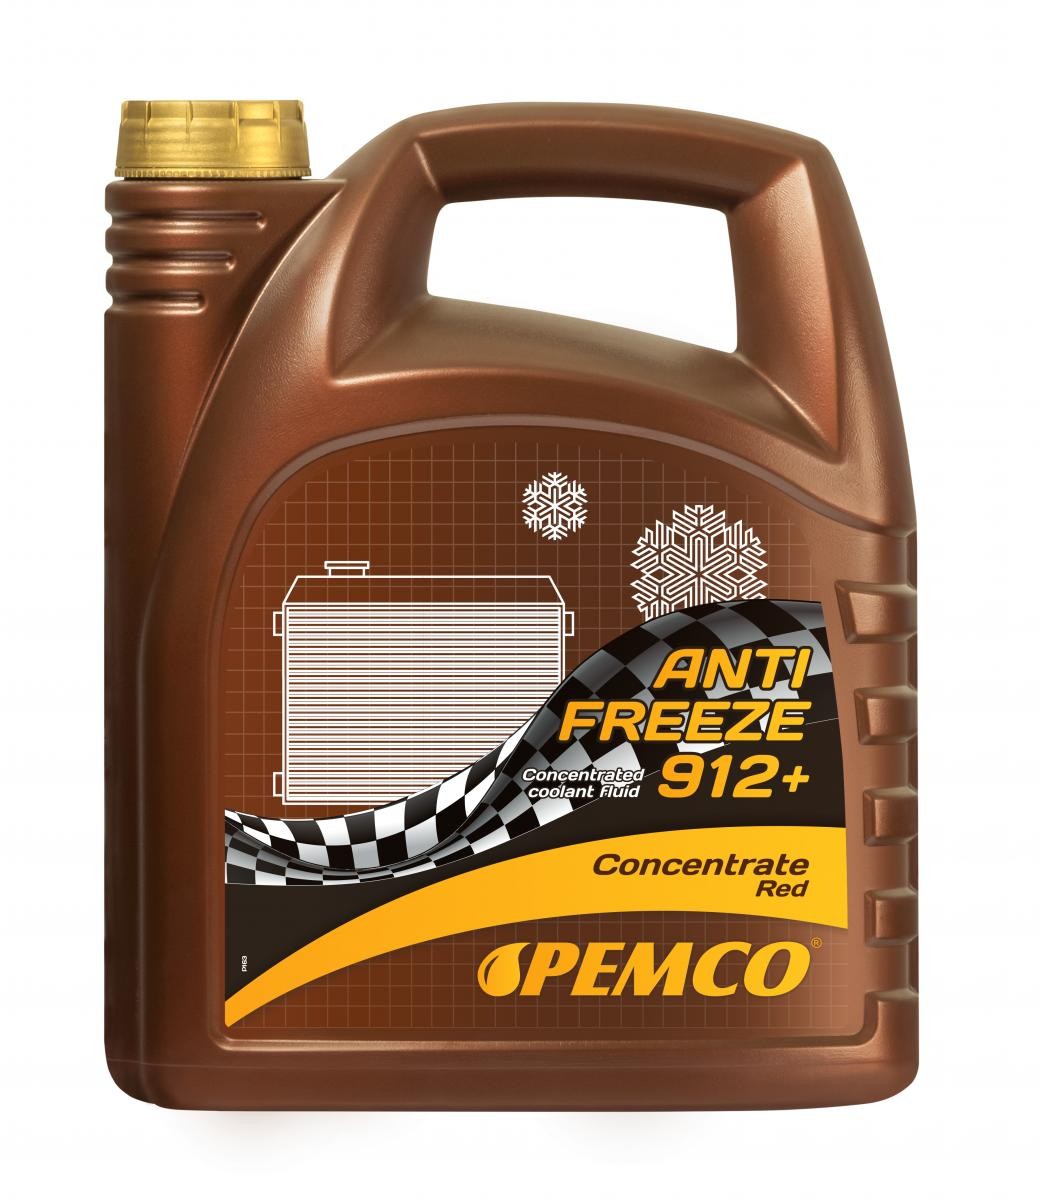 PEMCO Antifreeze 912+, Concentrate G12 red, 5l, -38(50/50) G12 Coolant PM0912C-5 buy